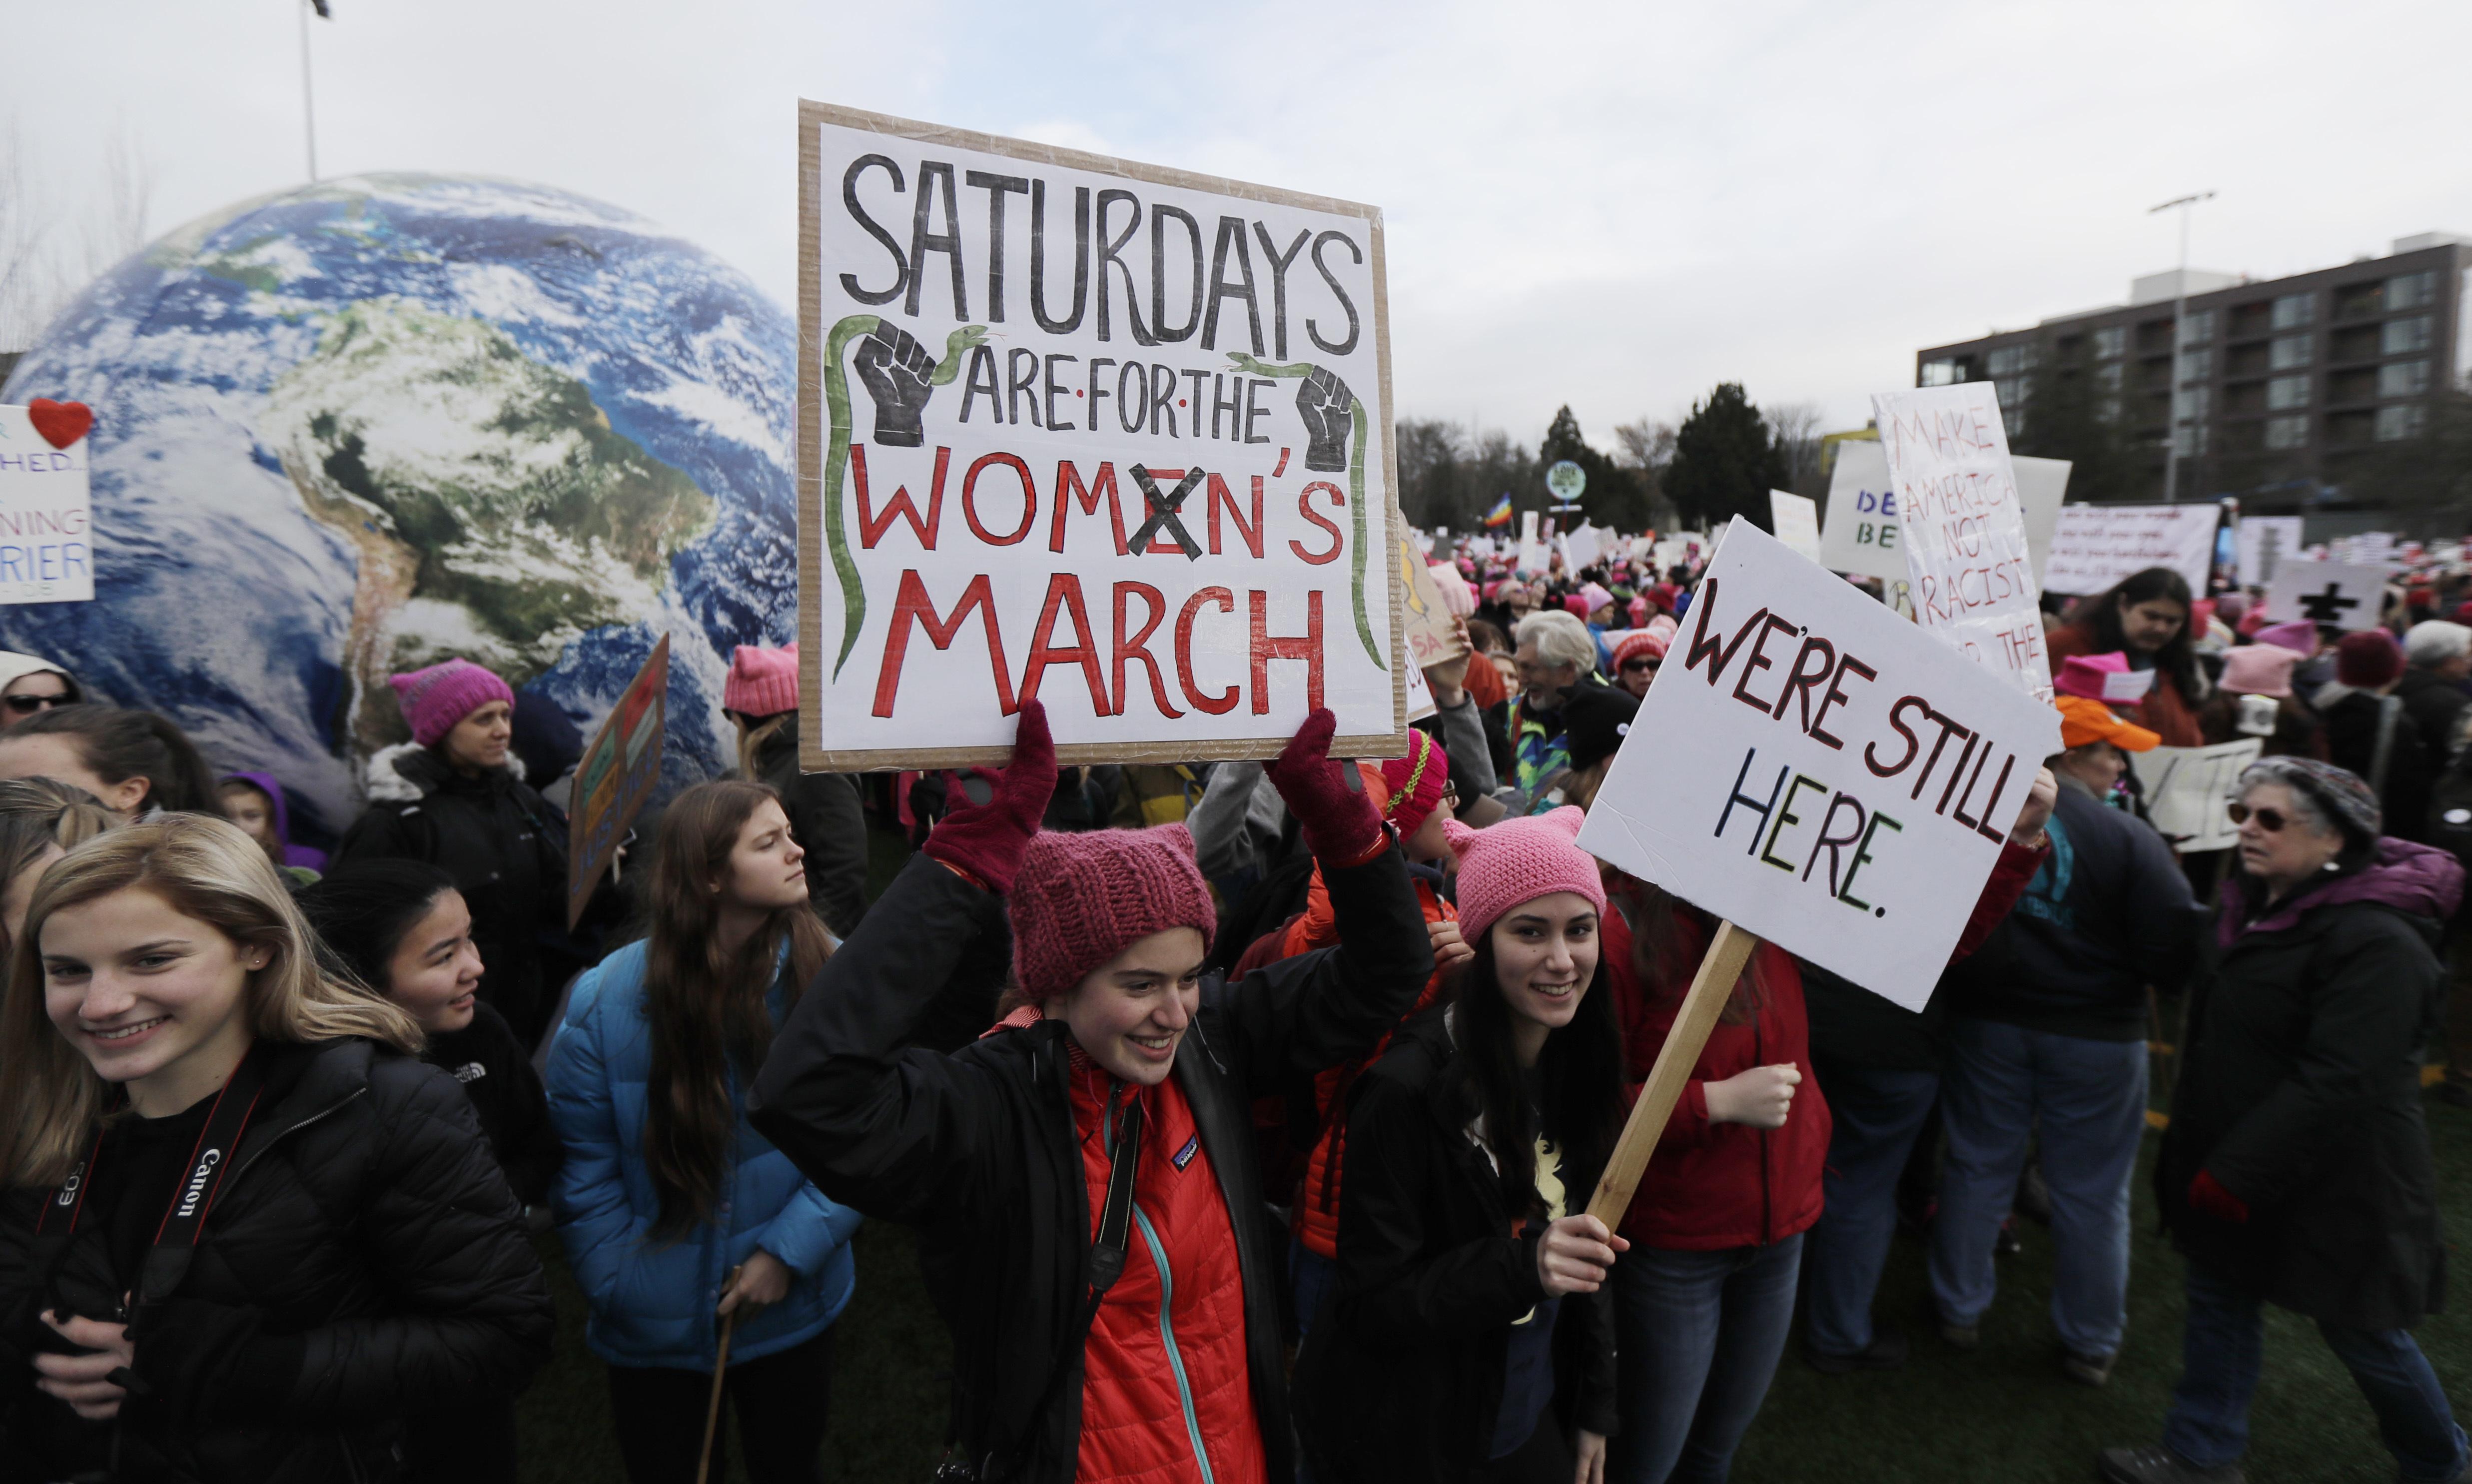 Big crowd turns out for Seattle women’s march, man arrested The